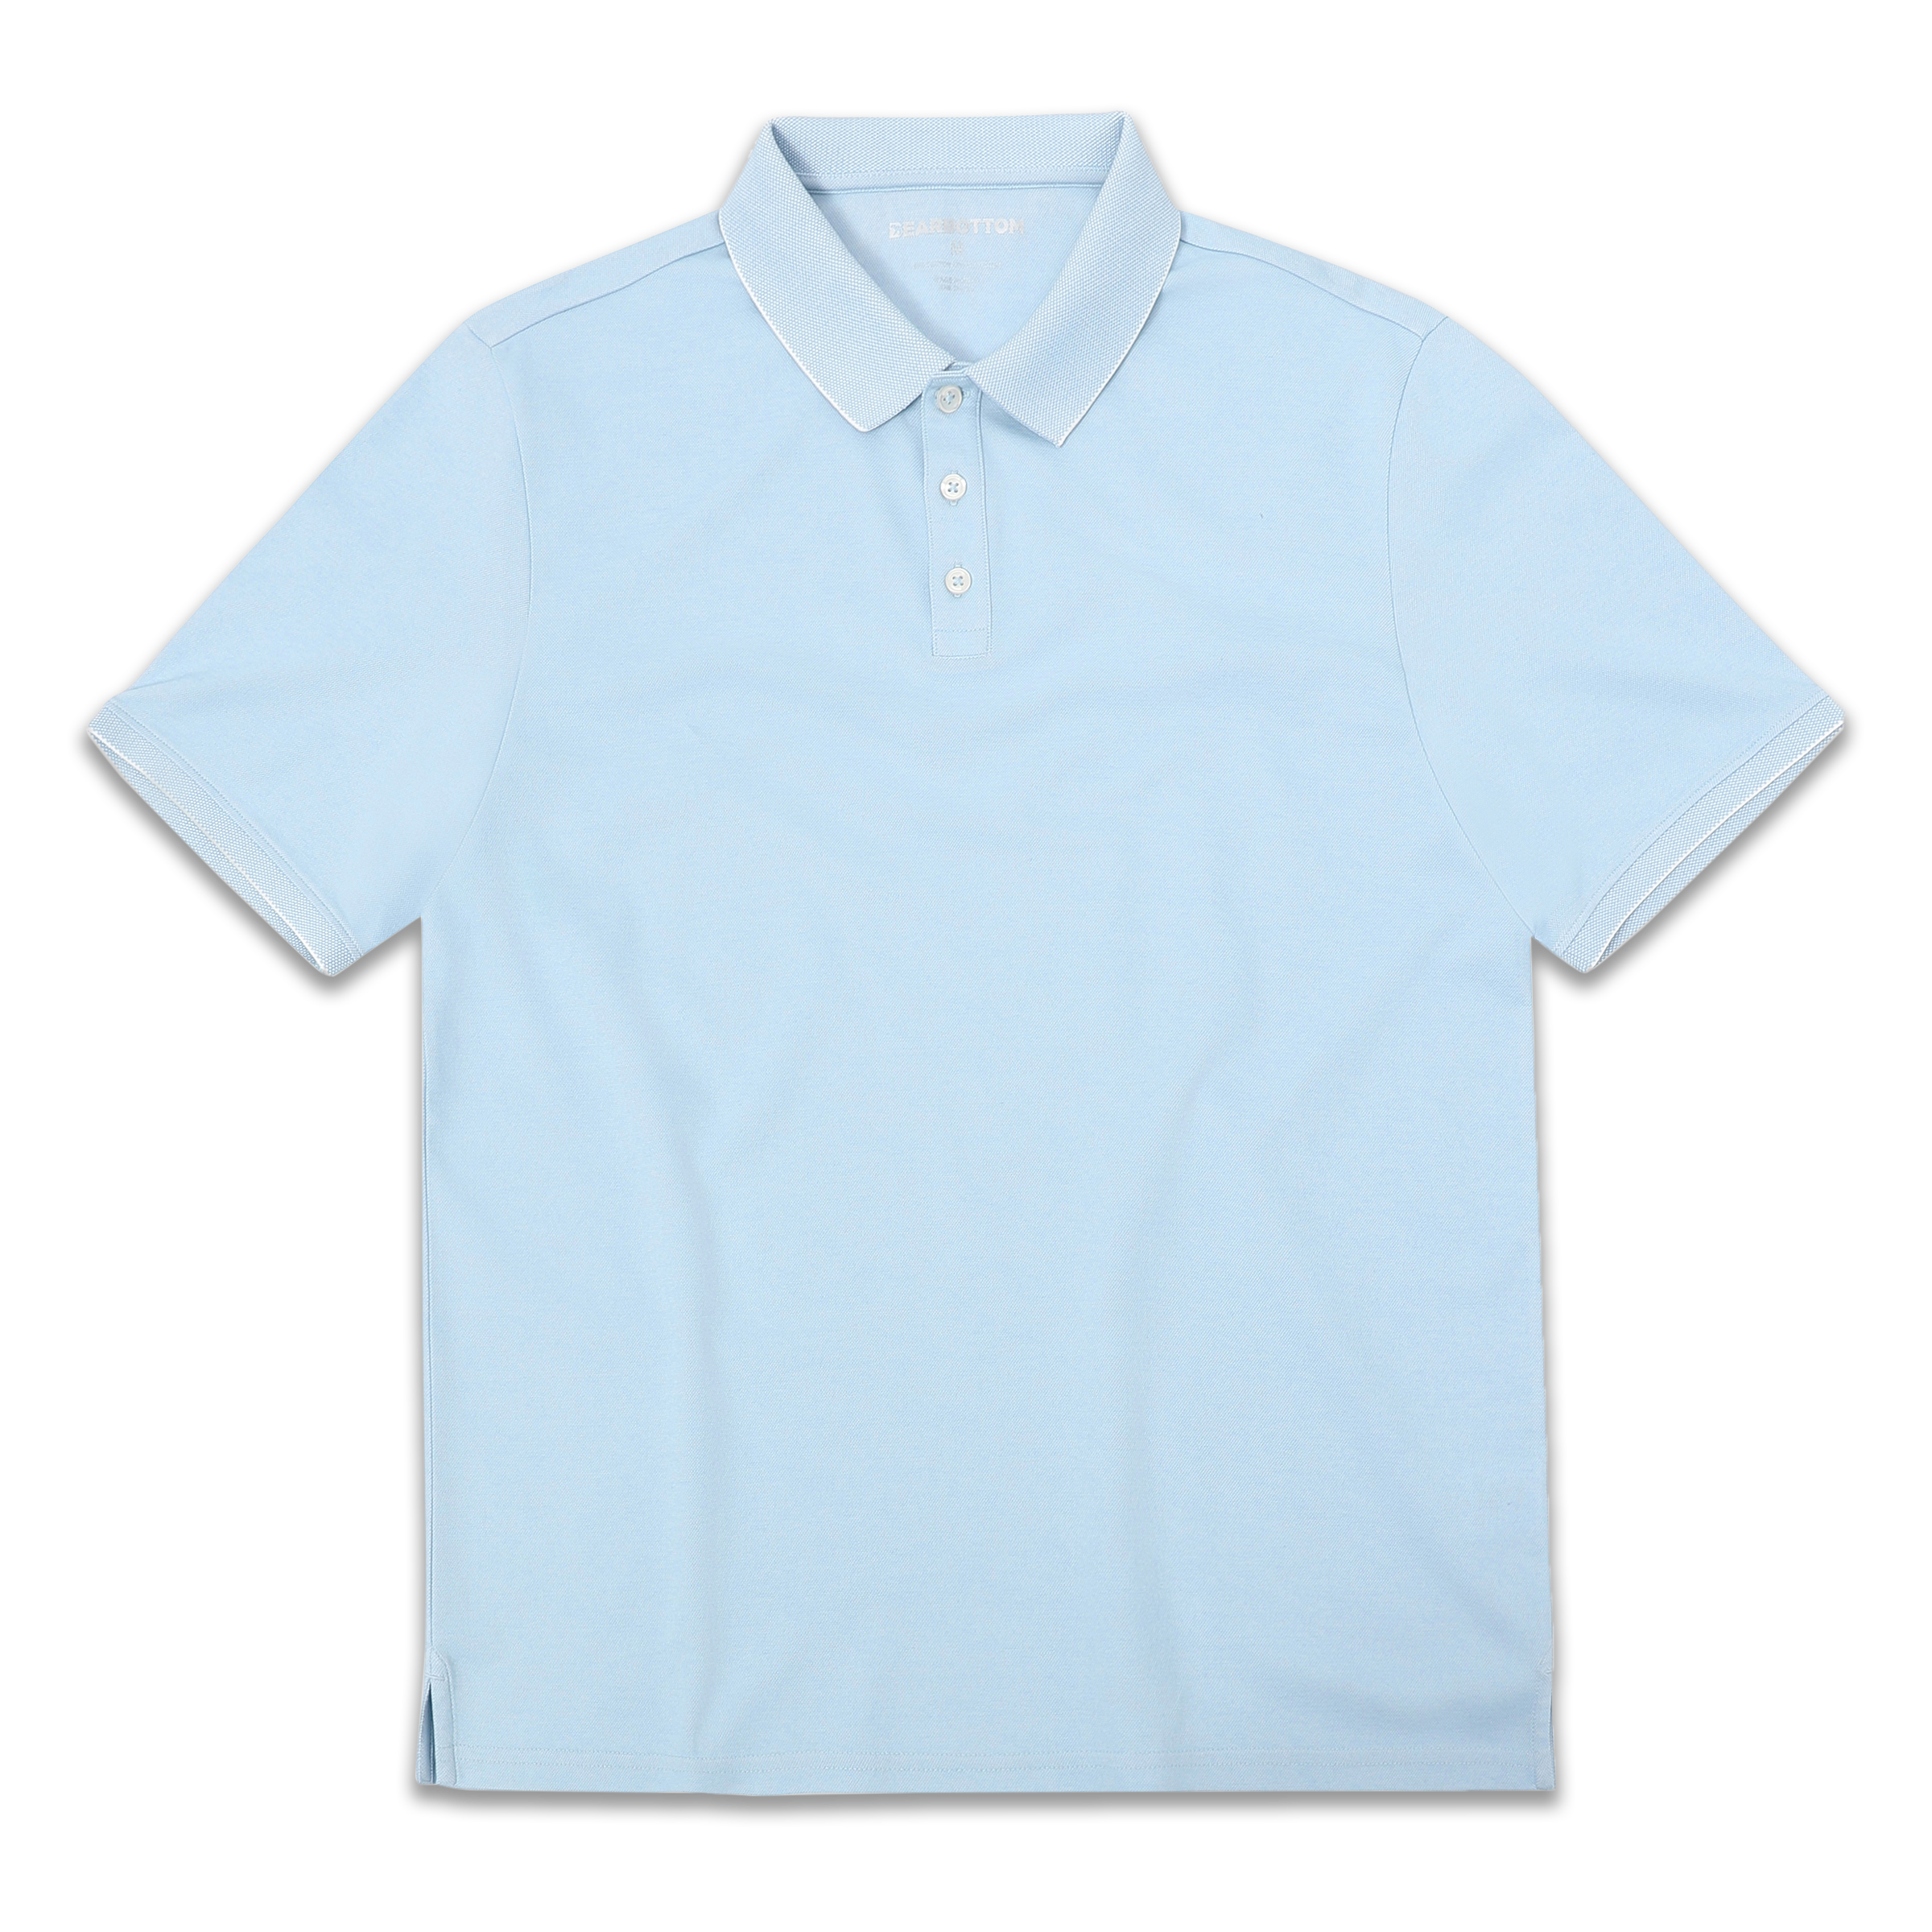 Range Polo Sky Blue front with ribbed collar, ribbed short sleeves, and 3 white buttons